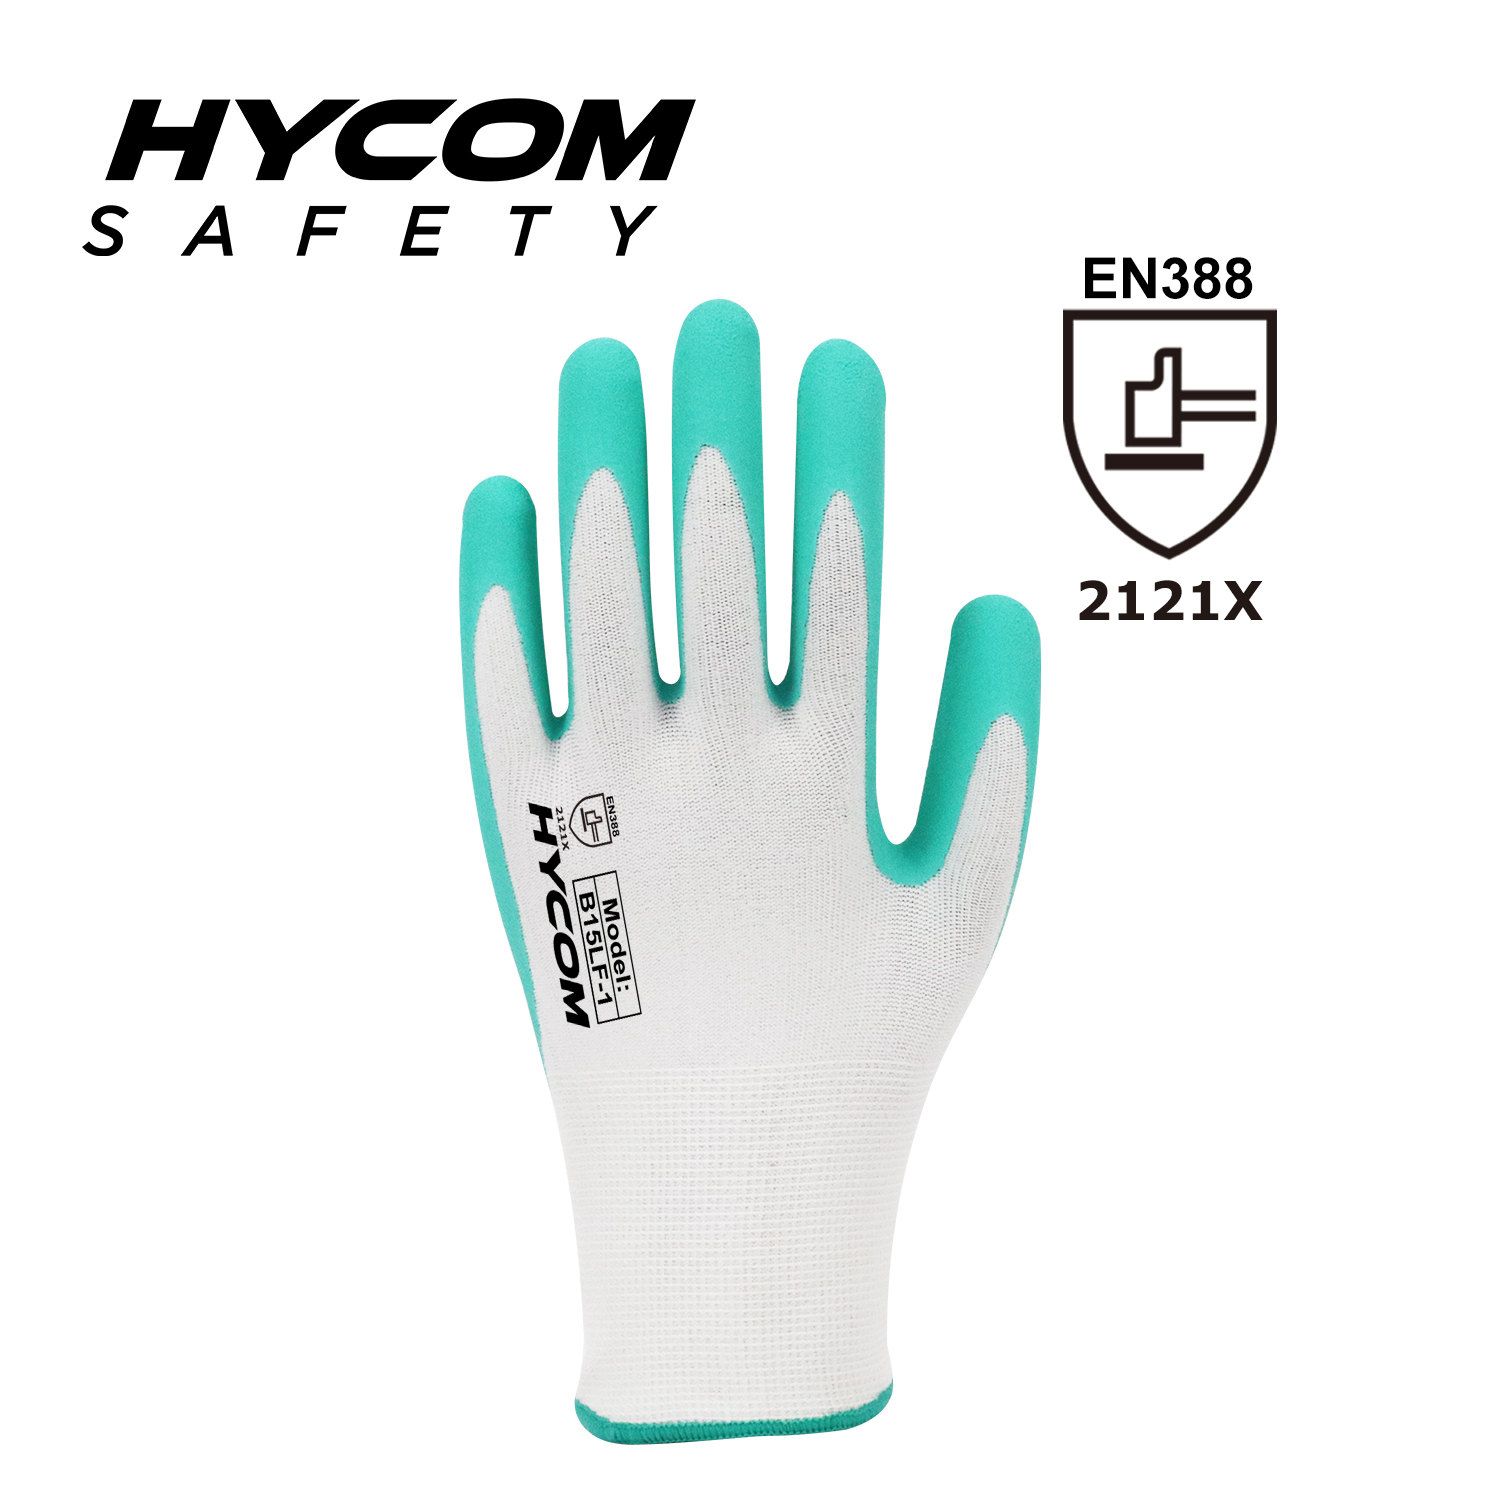 HYCOM 15G Bamboo Fiber Glove with Palm Foam Latex Coating Super Comfortable Safety Gloves